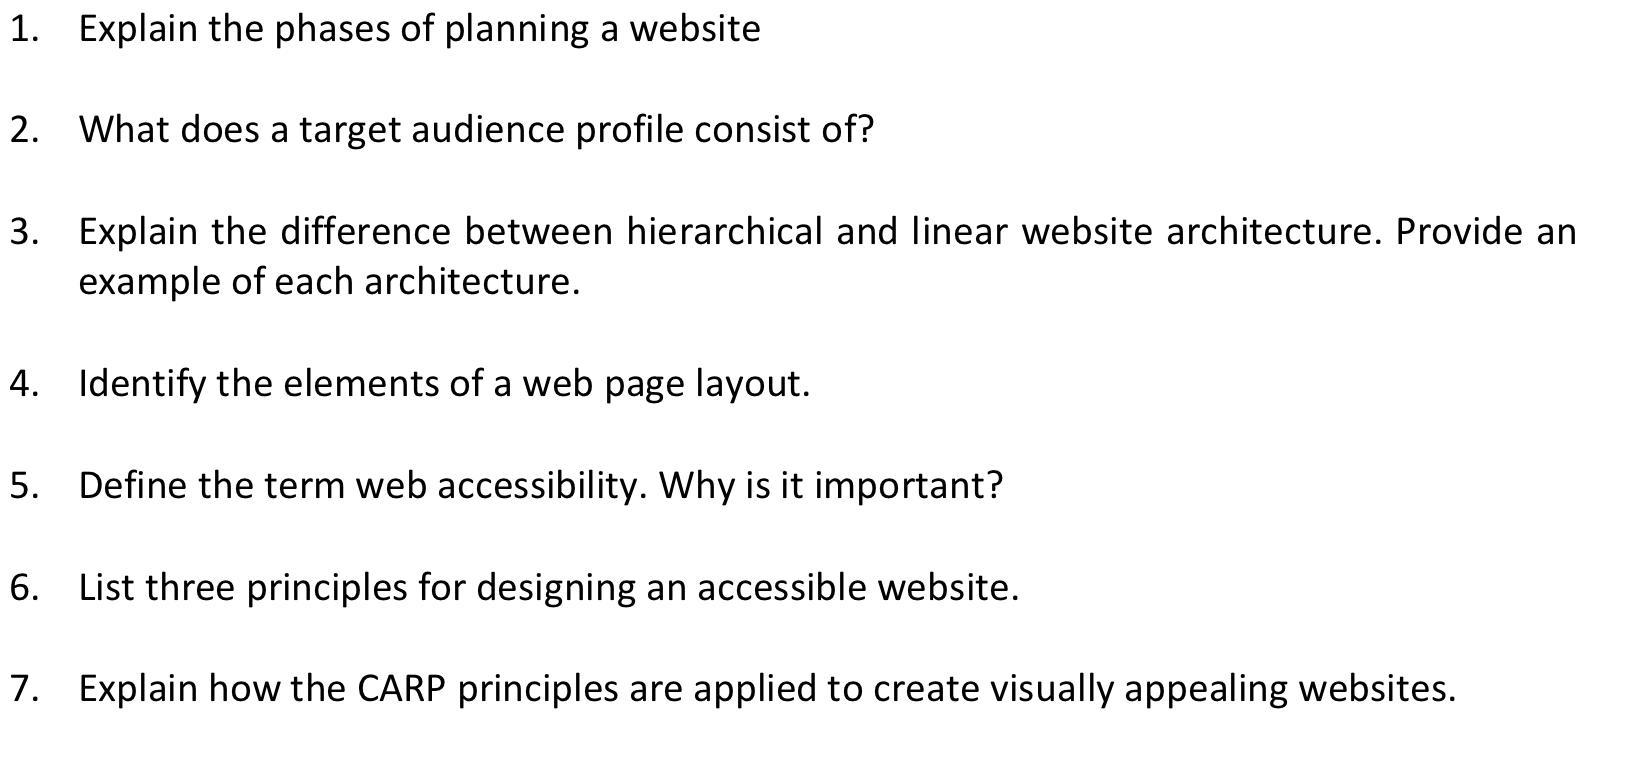 1. Explain the phases of planning a website 2. What does a target audience profile consist of? 3. Explain the